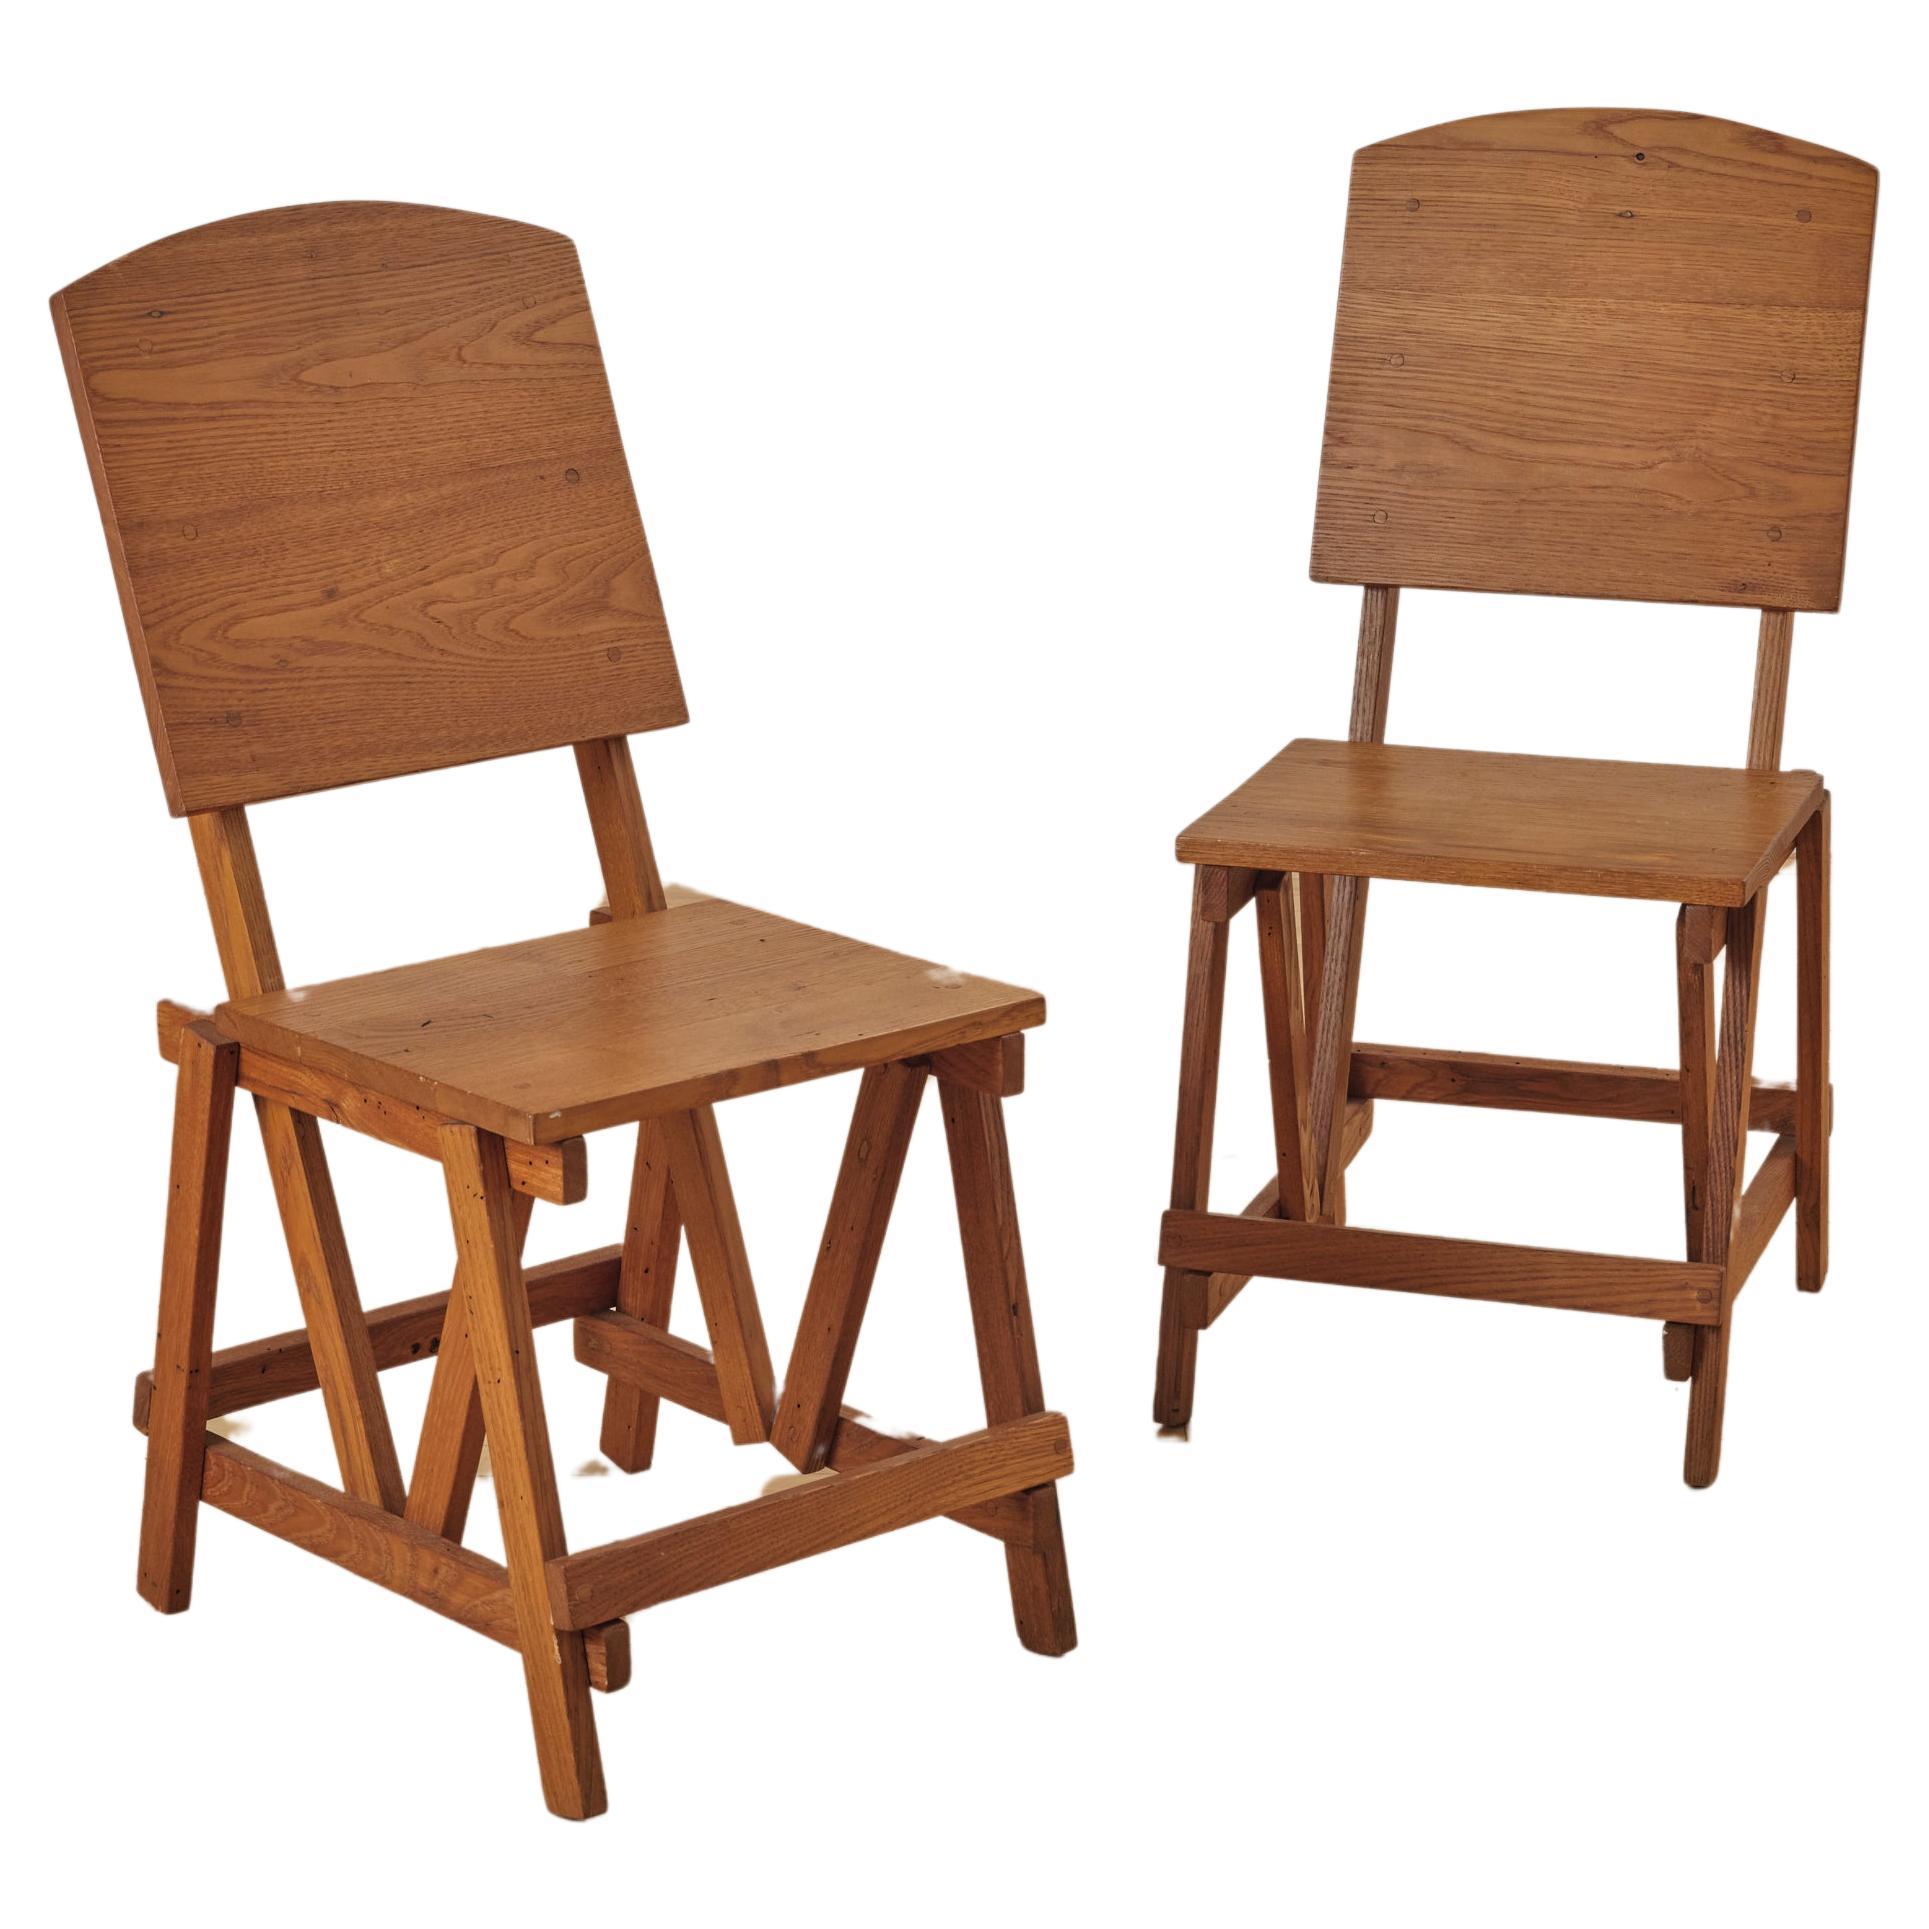 A Pair of Architectural Constructivist Oak Accent Chairs For Sale